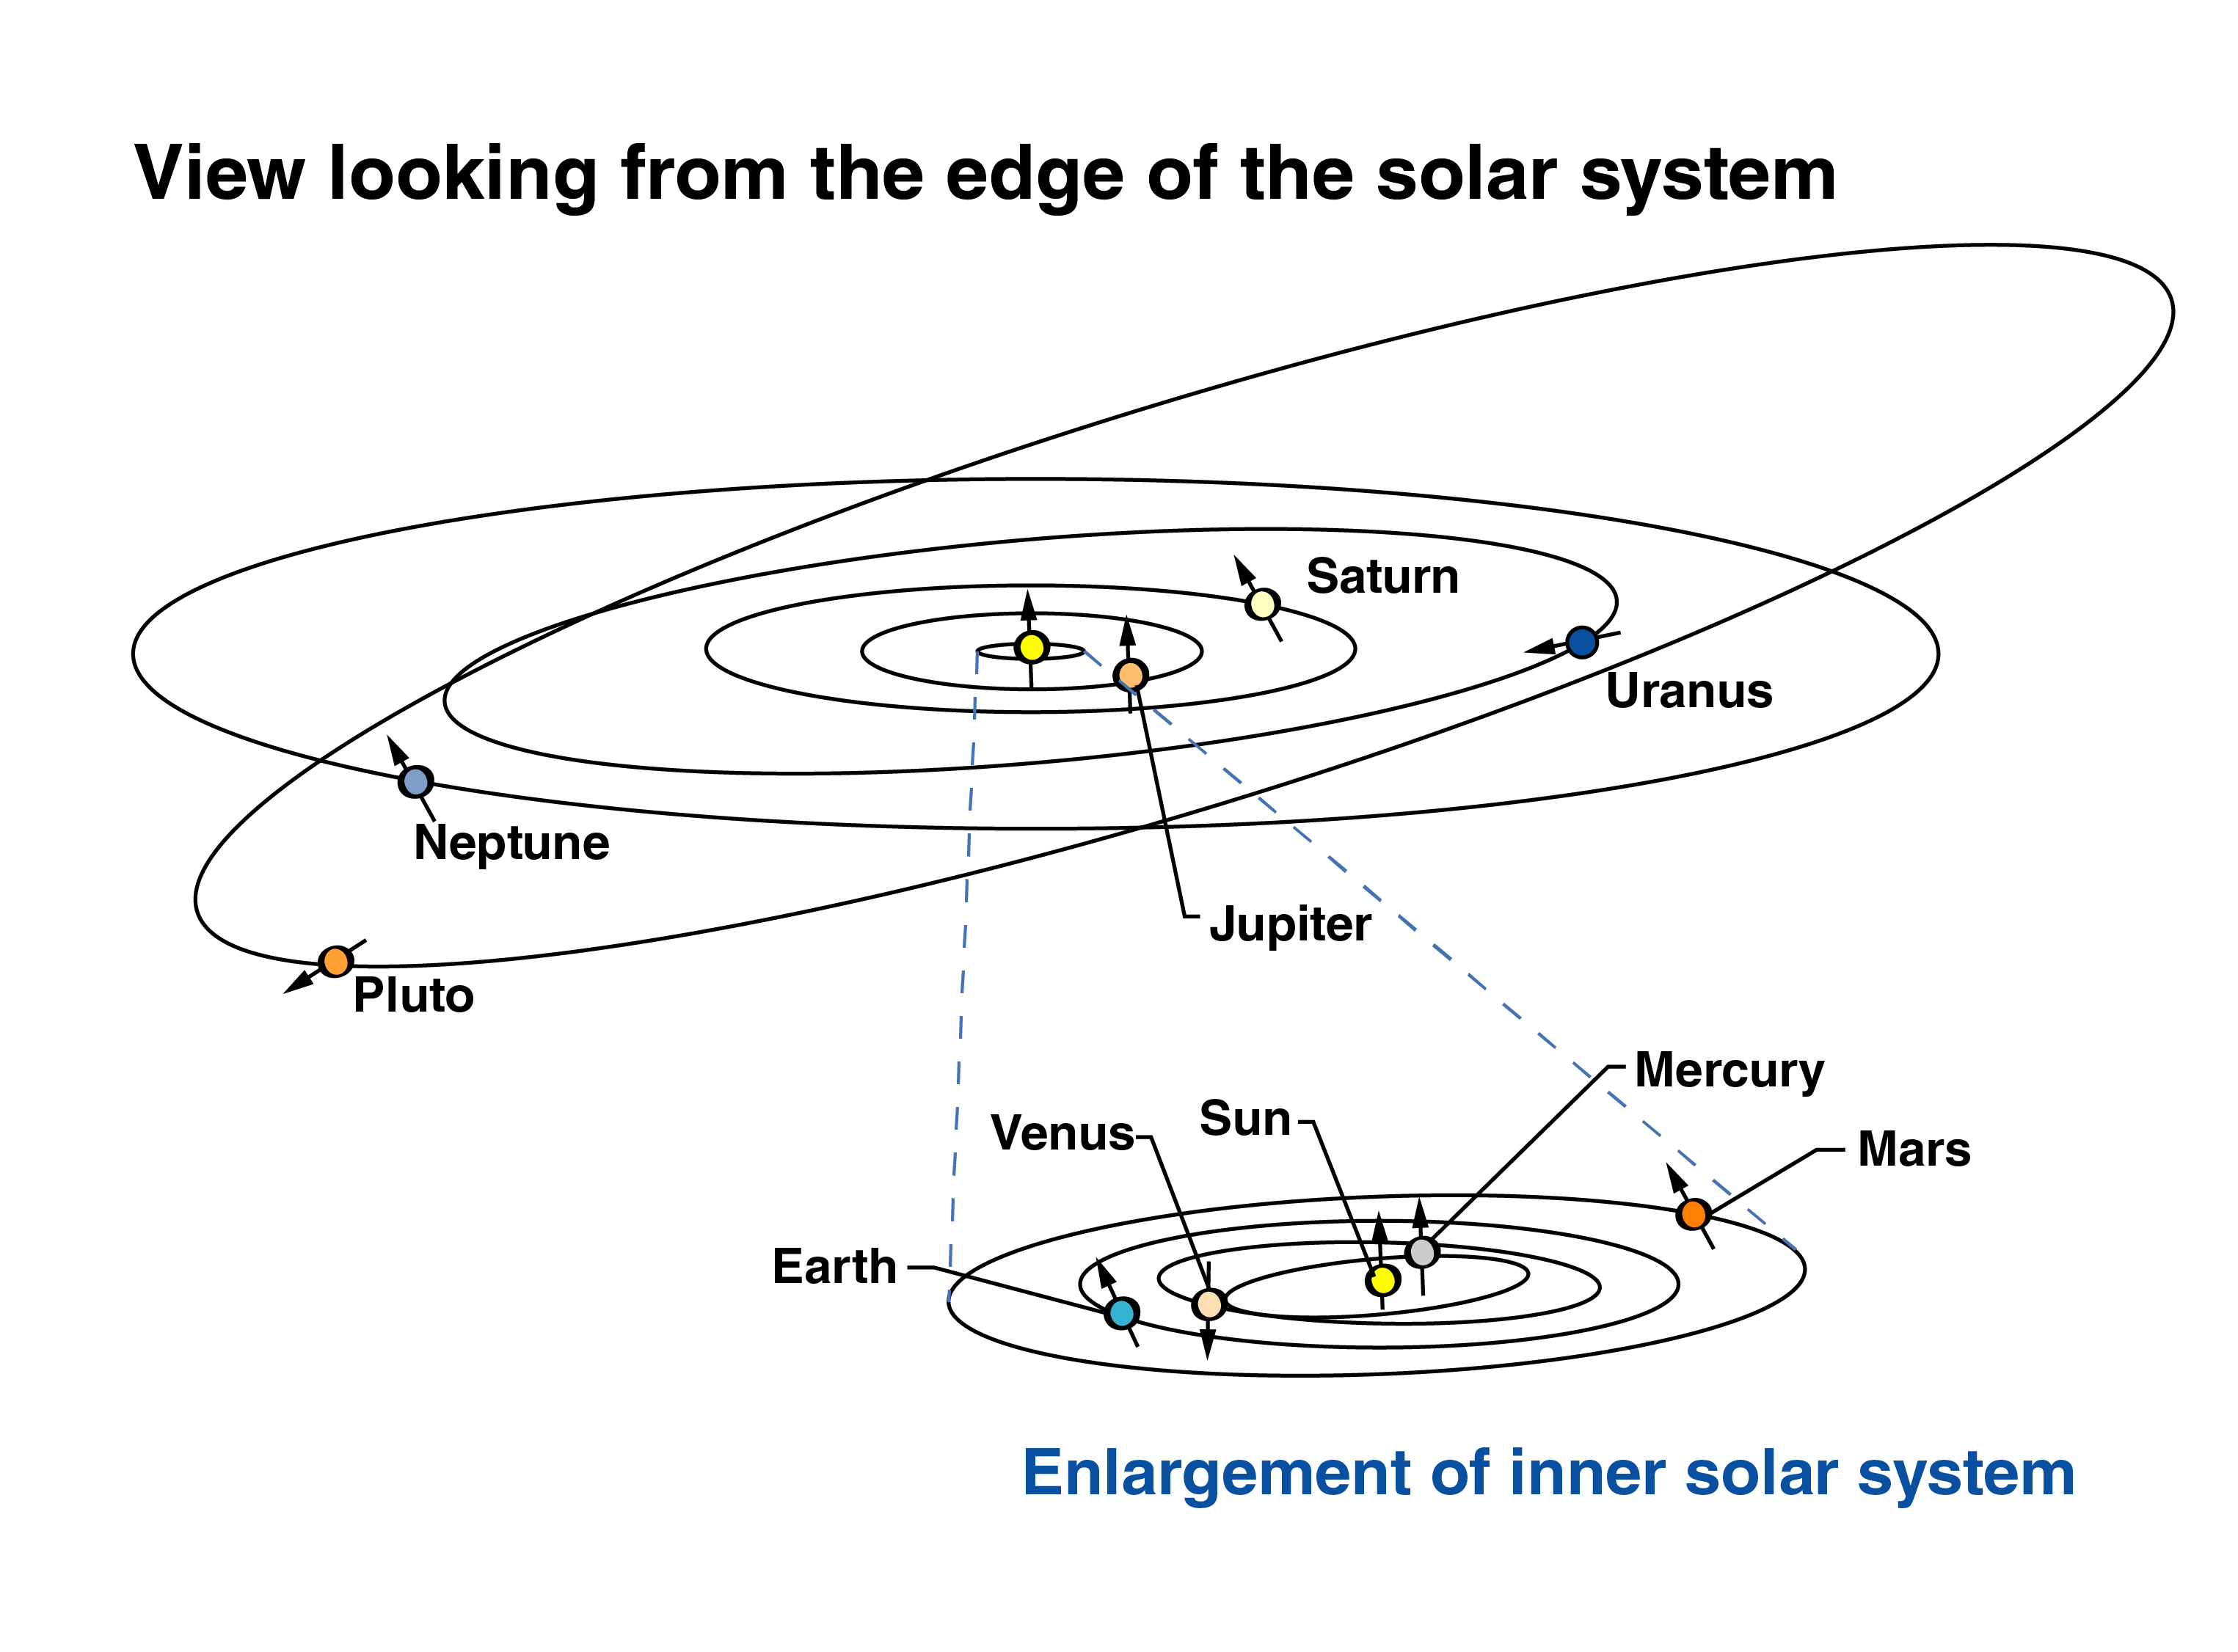 A view of the solar system looking from the edge of the solar system. The illustration demonstrates which direction the planets' and Pluto's axes of rotation point. Pluto's and Uranus' axes of rotation point along the same plane as their orbits, instead of more or less up and down.